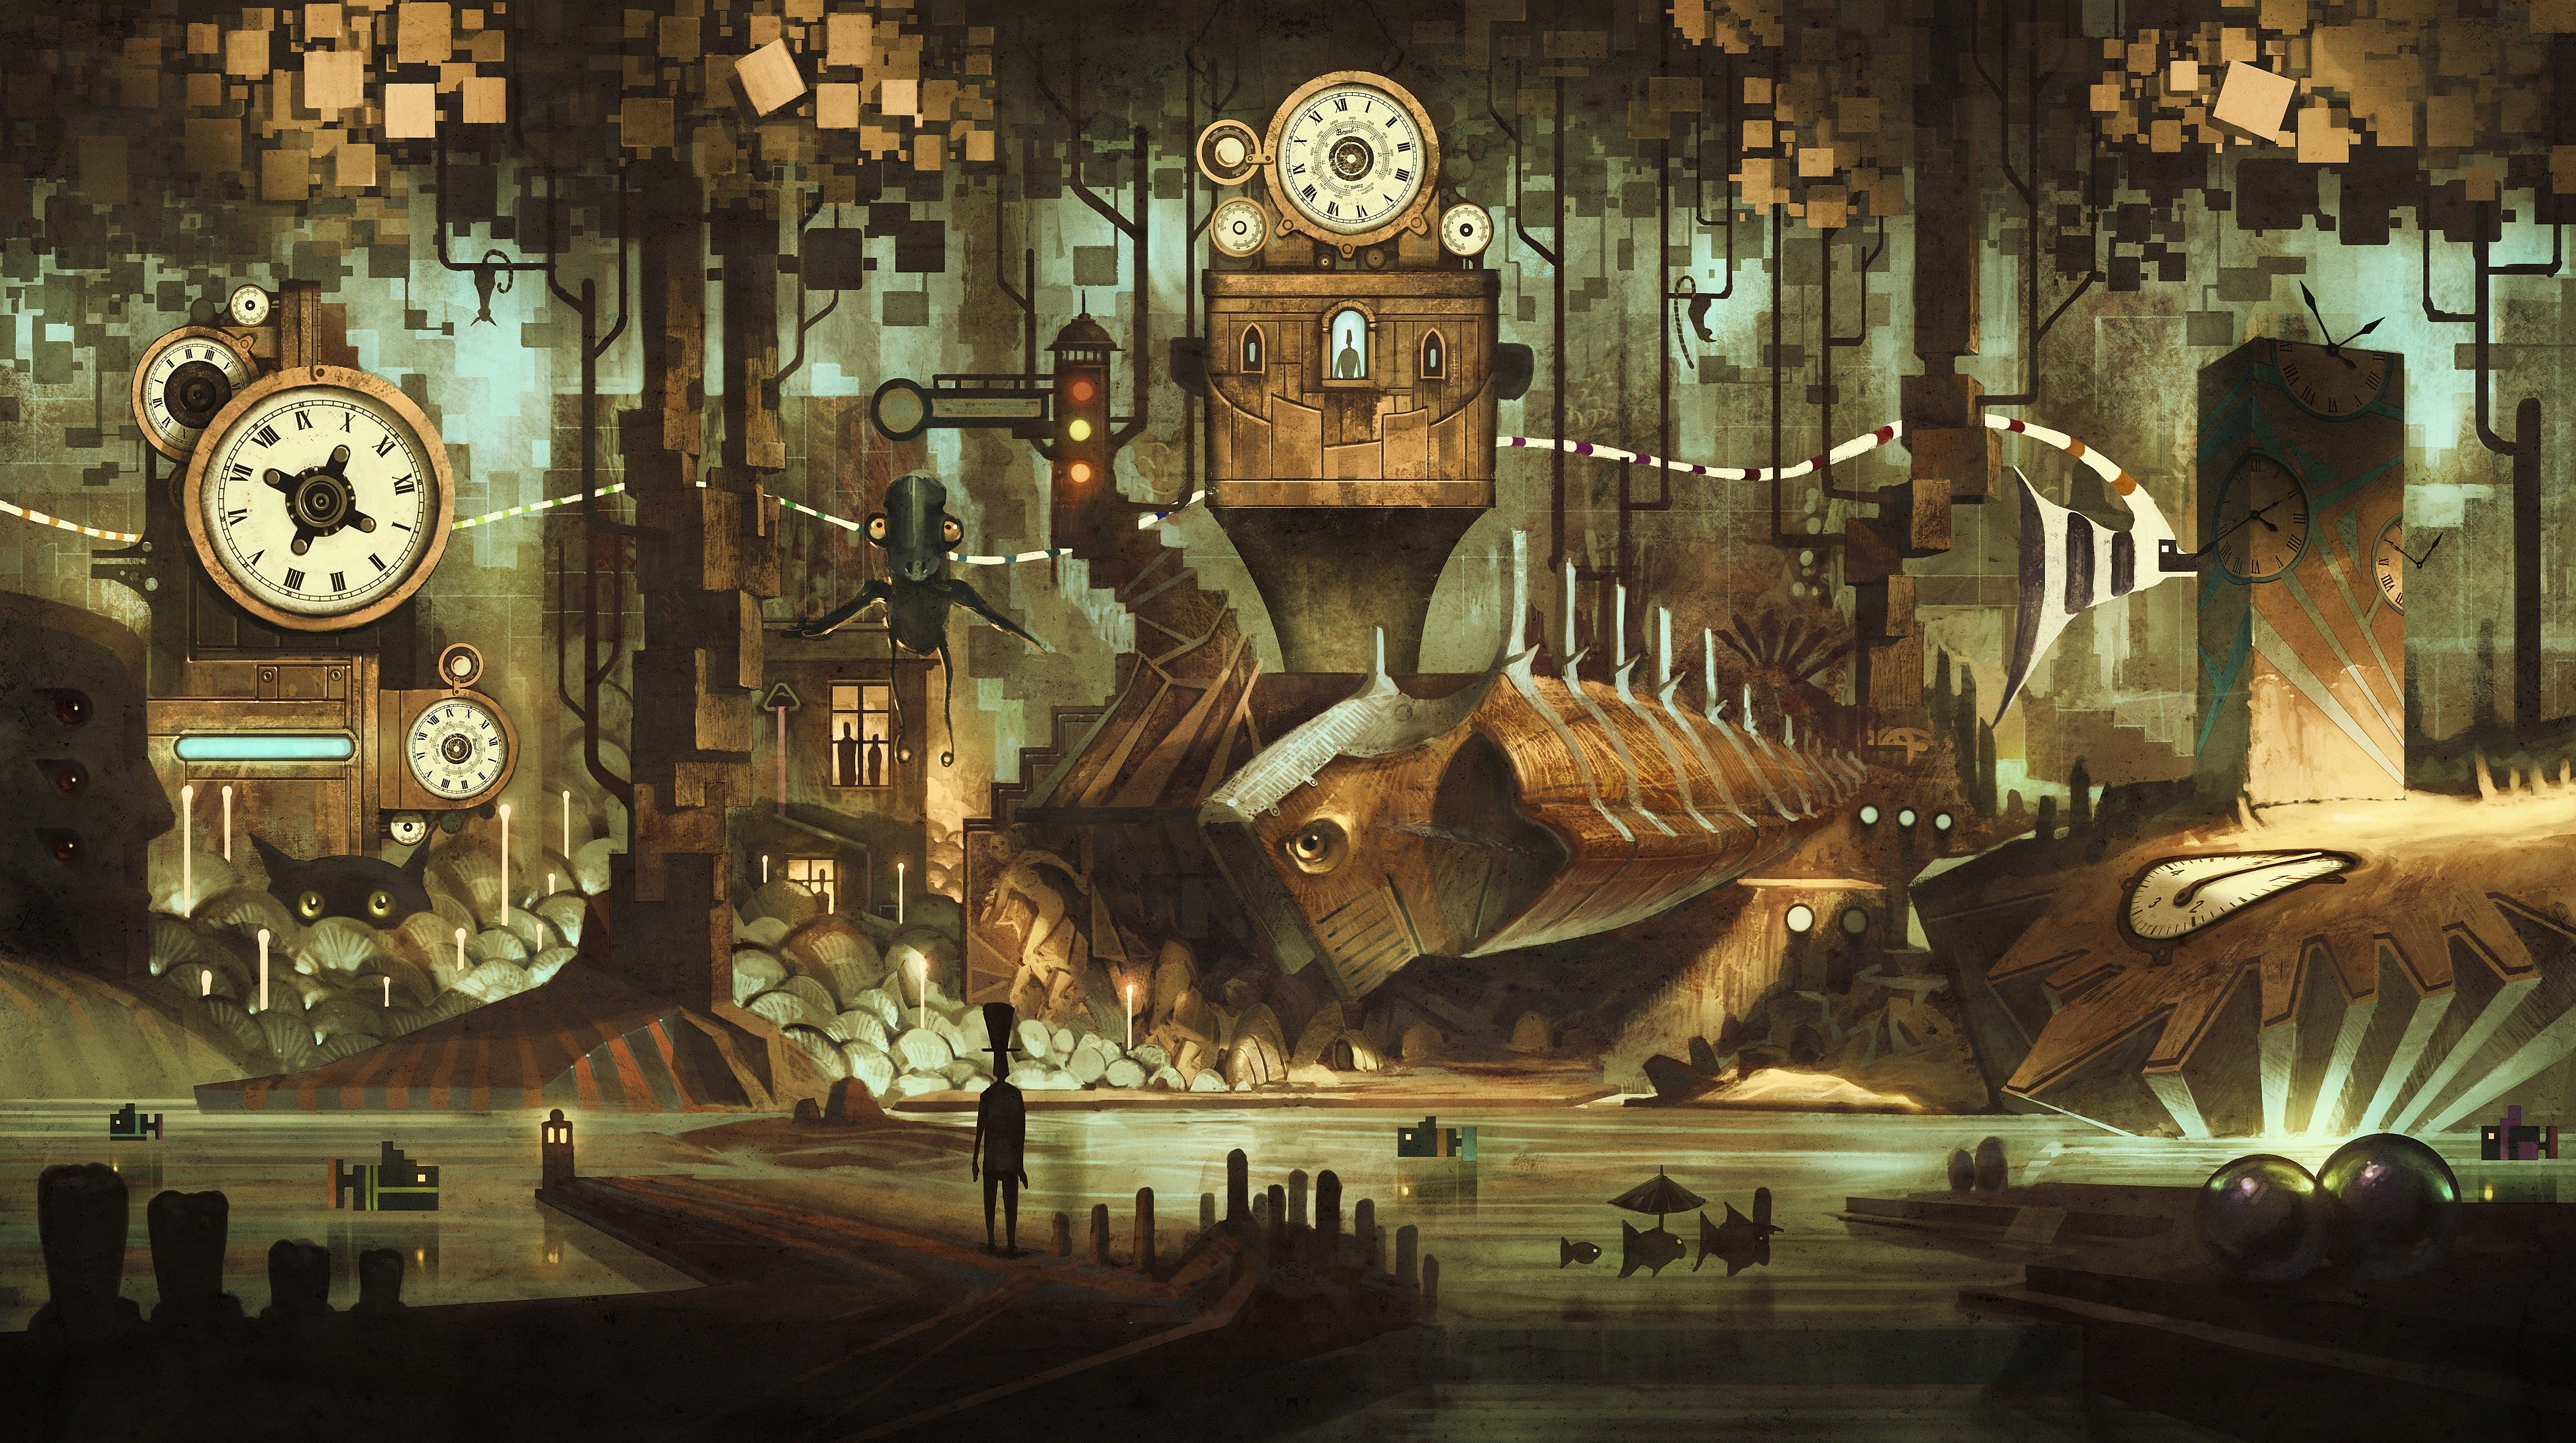 280 Steampunk HD Wallpapers | Backgrounds - Wallpaper Abyss - Page 4